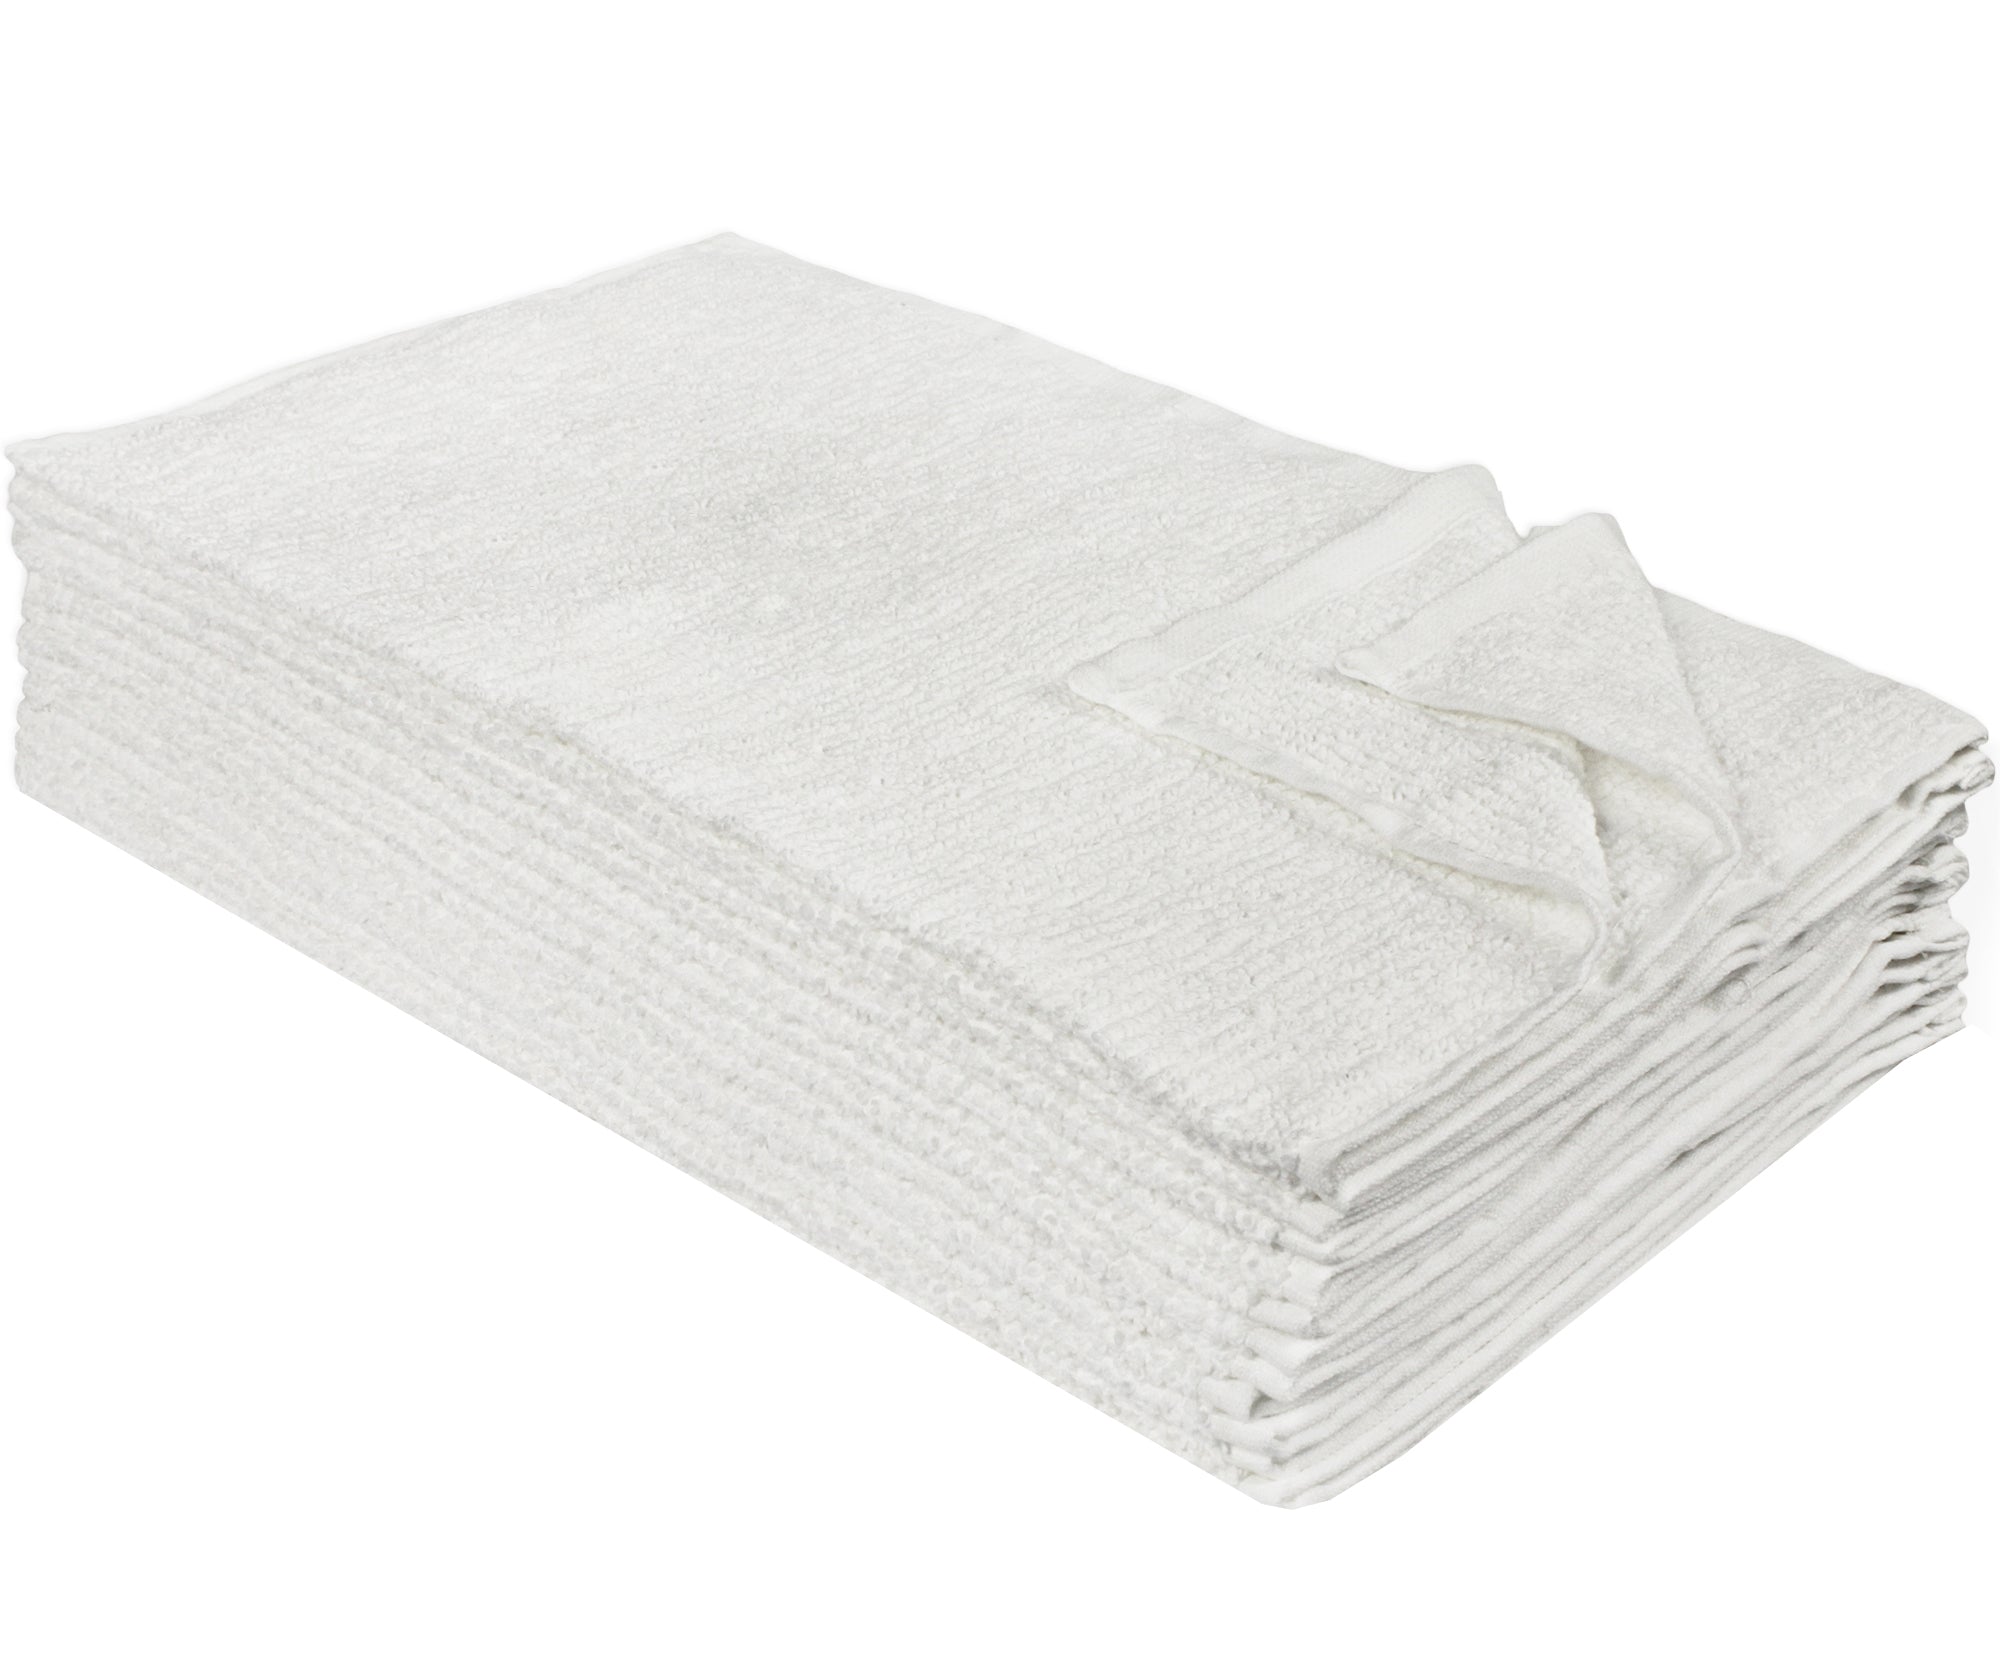 Atlas Cotton Bar Mops Kitchen Towels, Full Solid White, 100% Ring